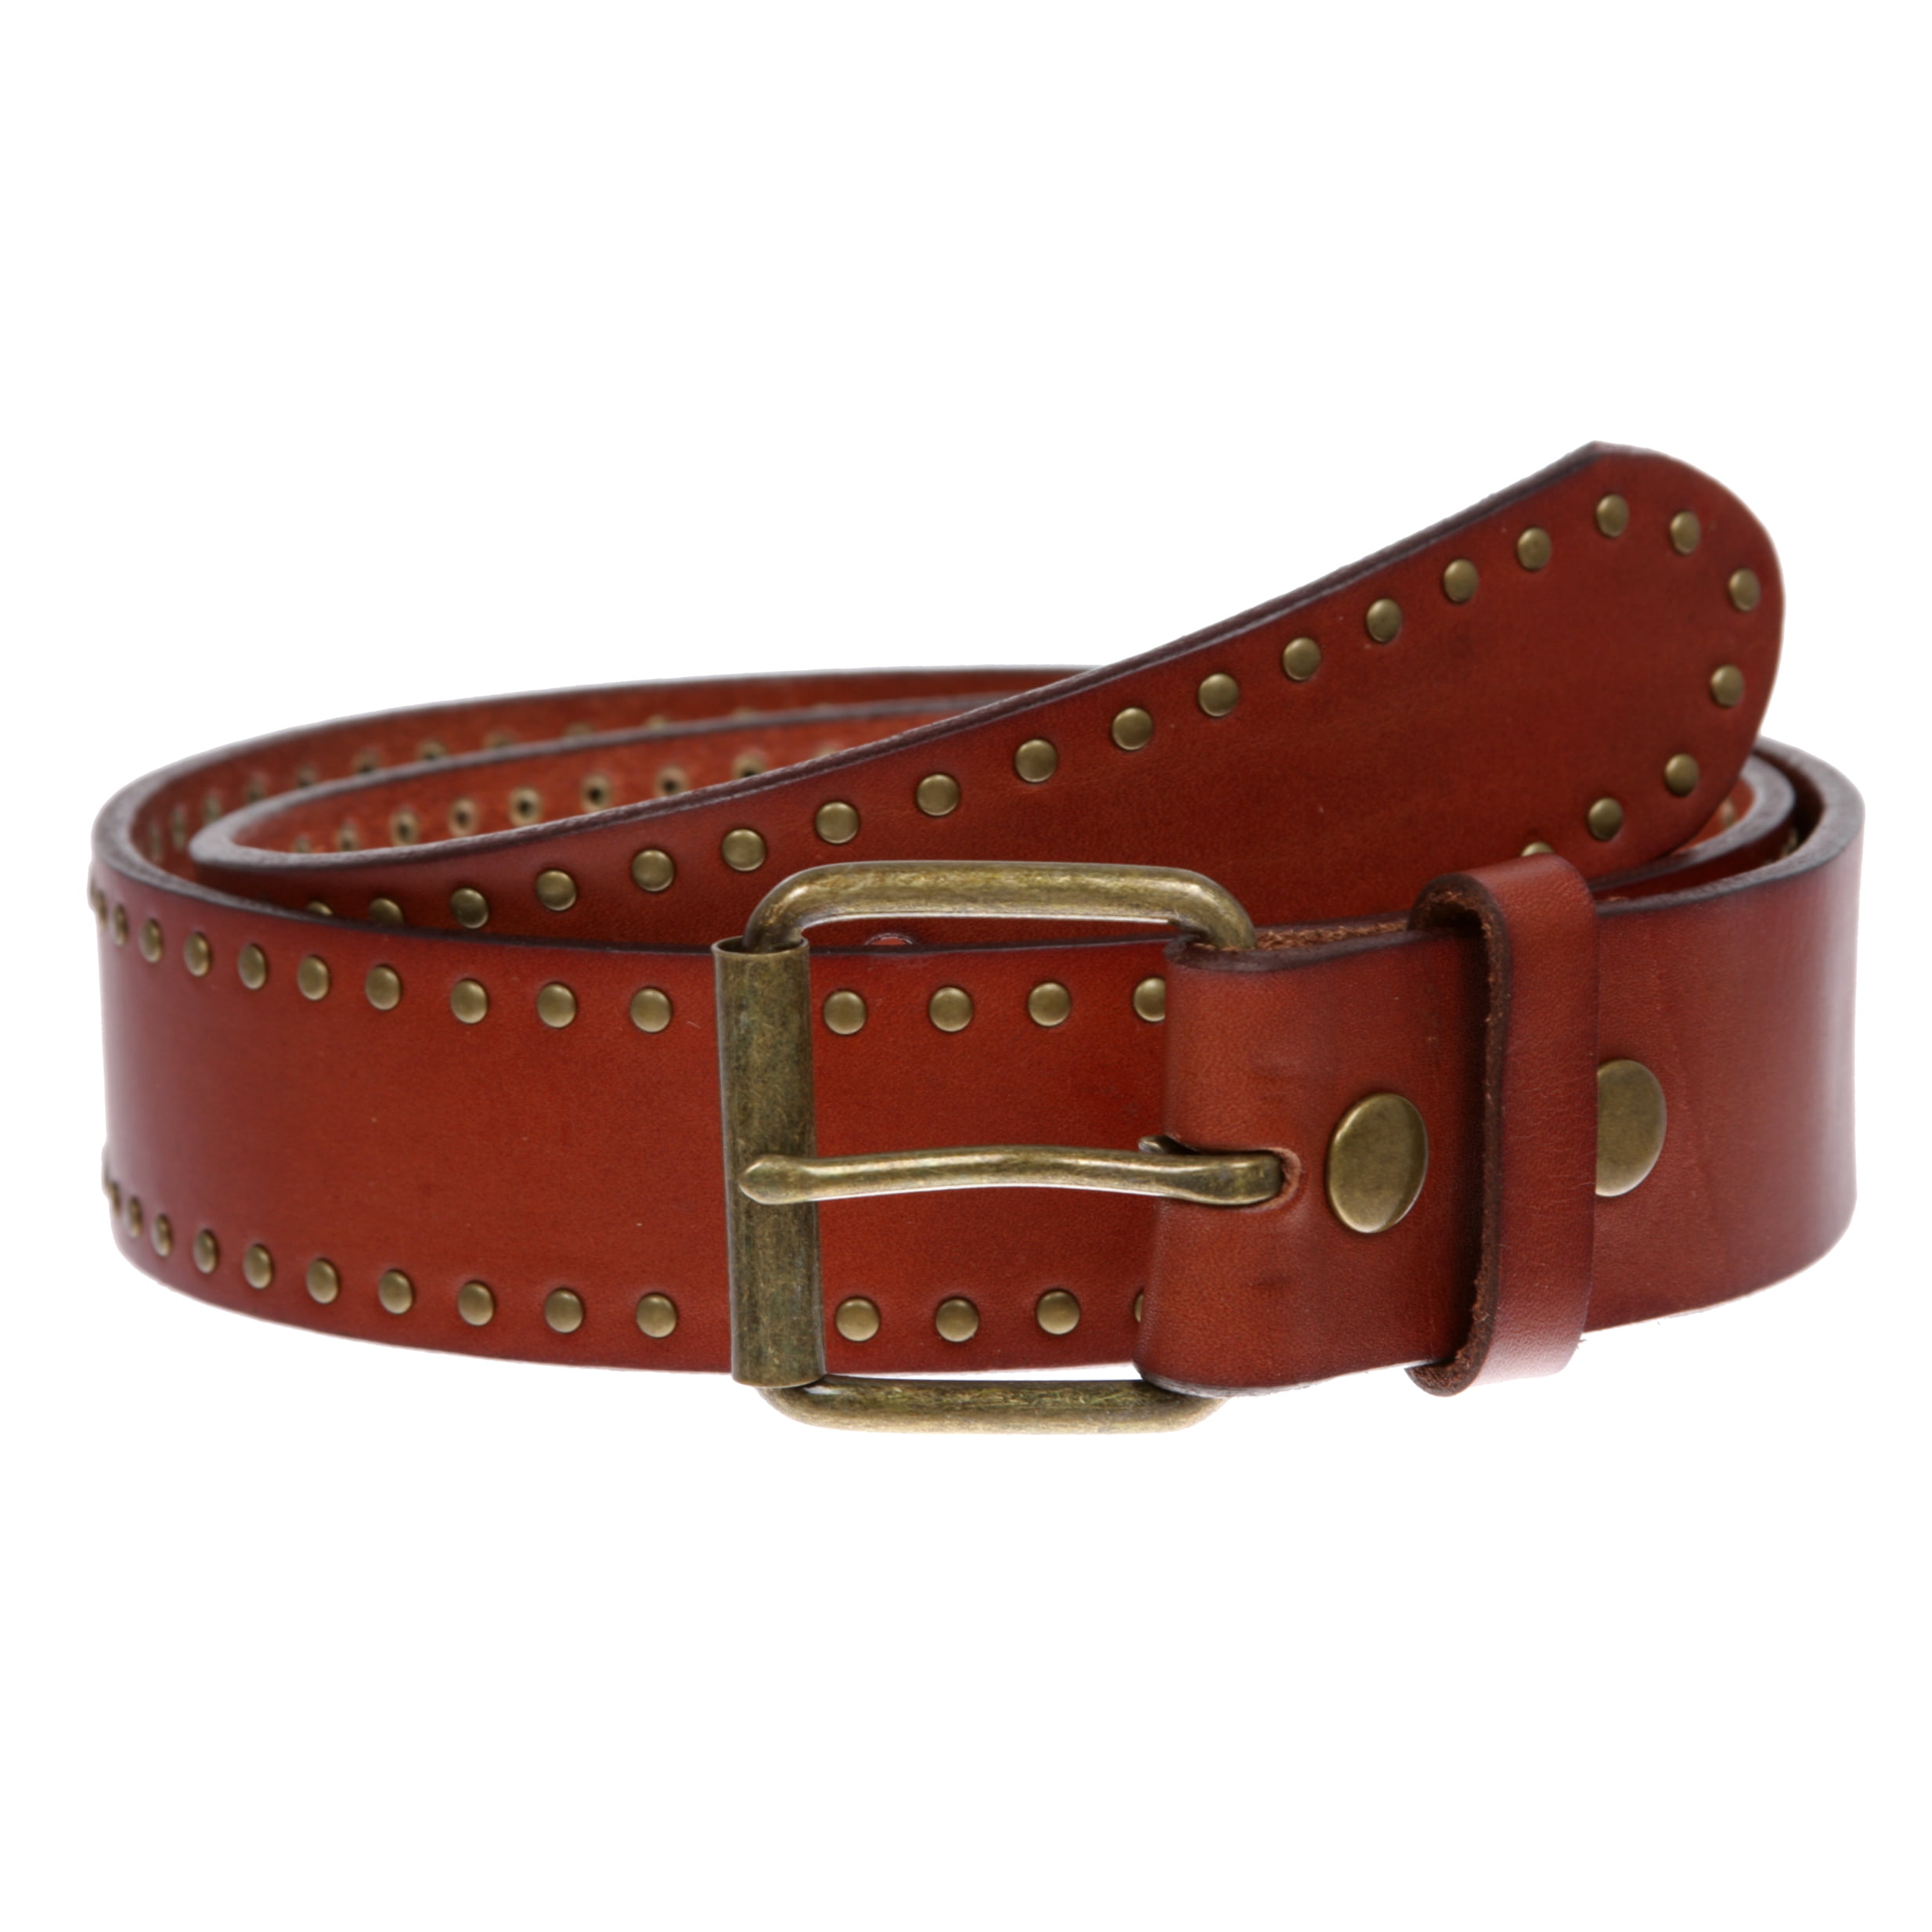 Mens Full Grain One Piece leather belt w/Snaps for Interchangeable Buckles,1.50 Wide USA 